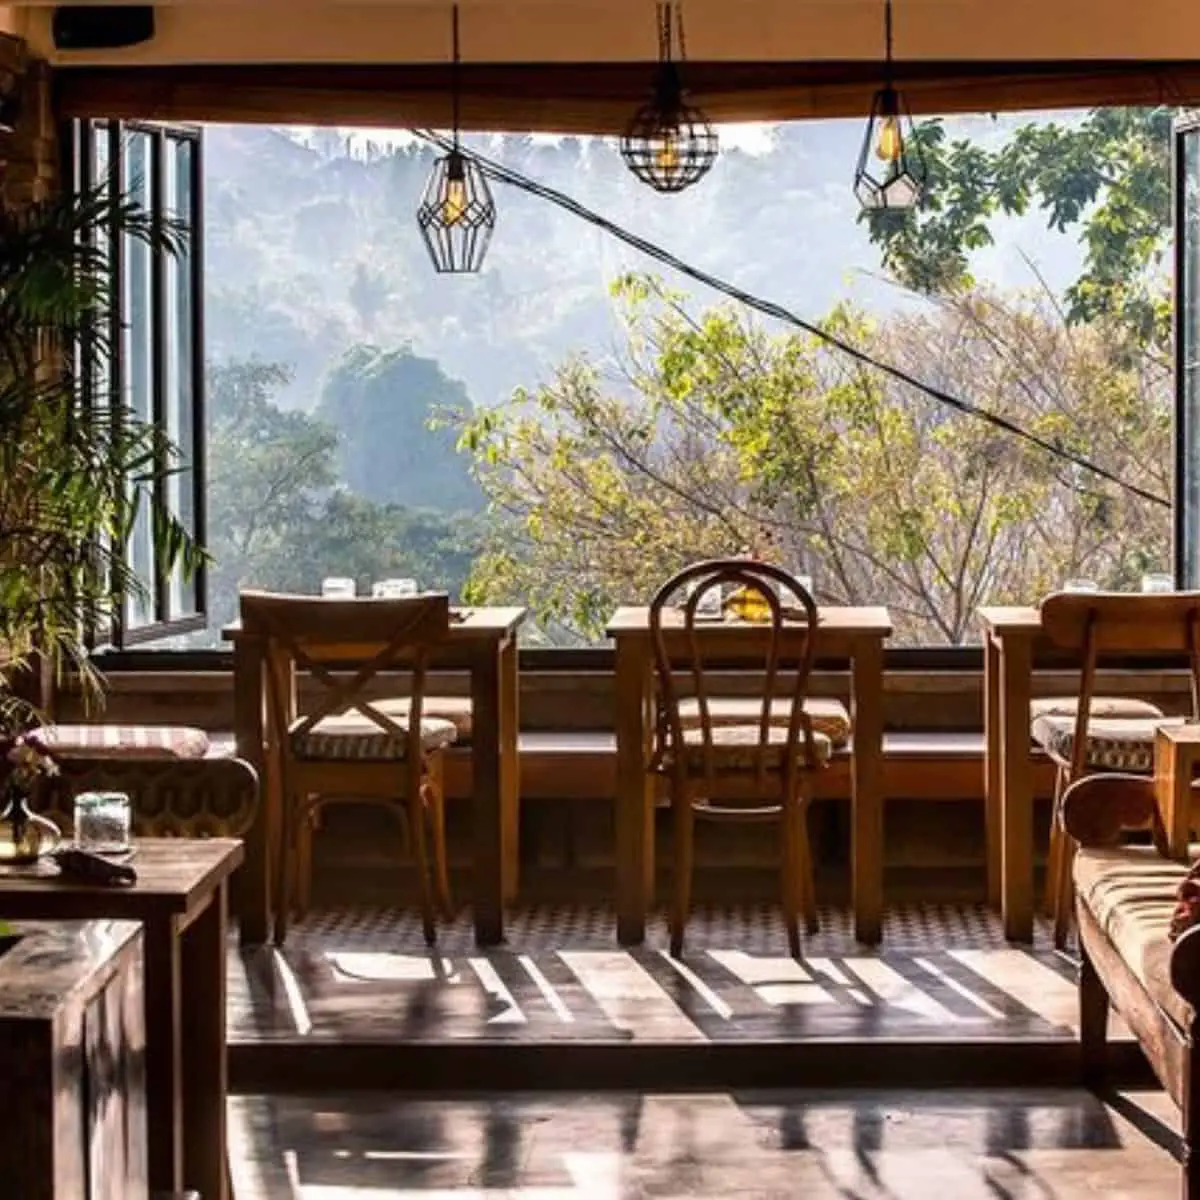 Zest Ubud Cafe scenic view with wooden chair and table plus trees outside